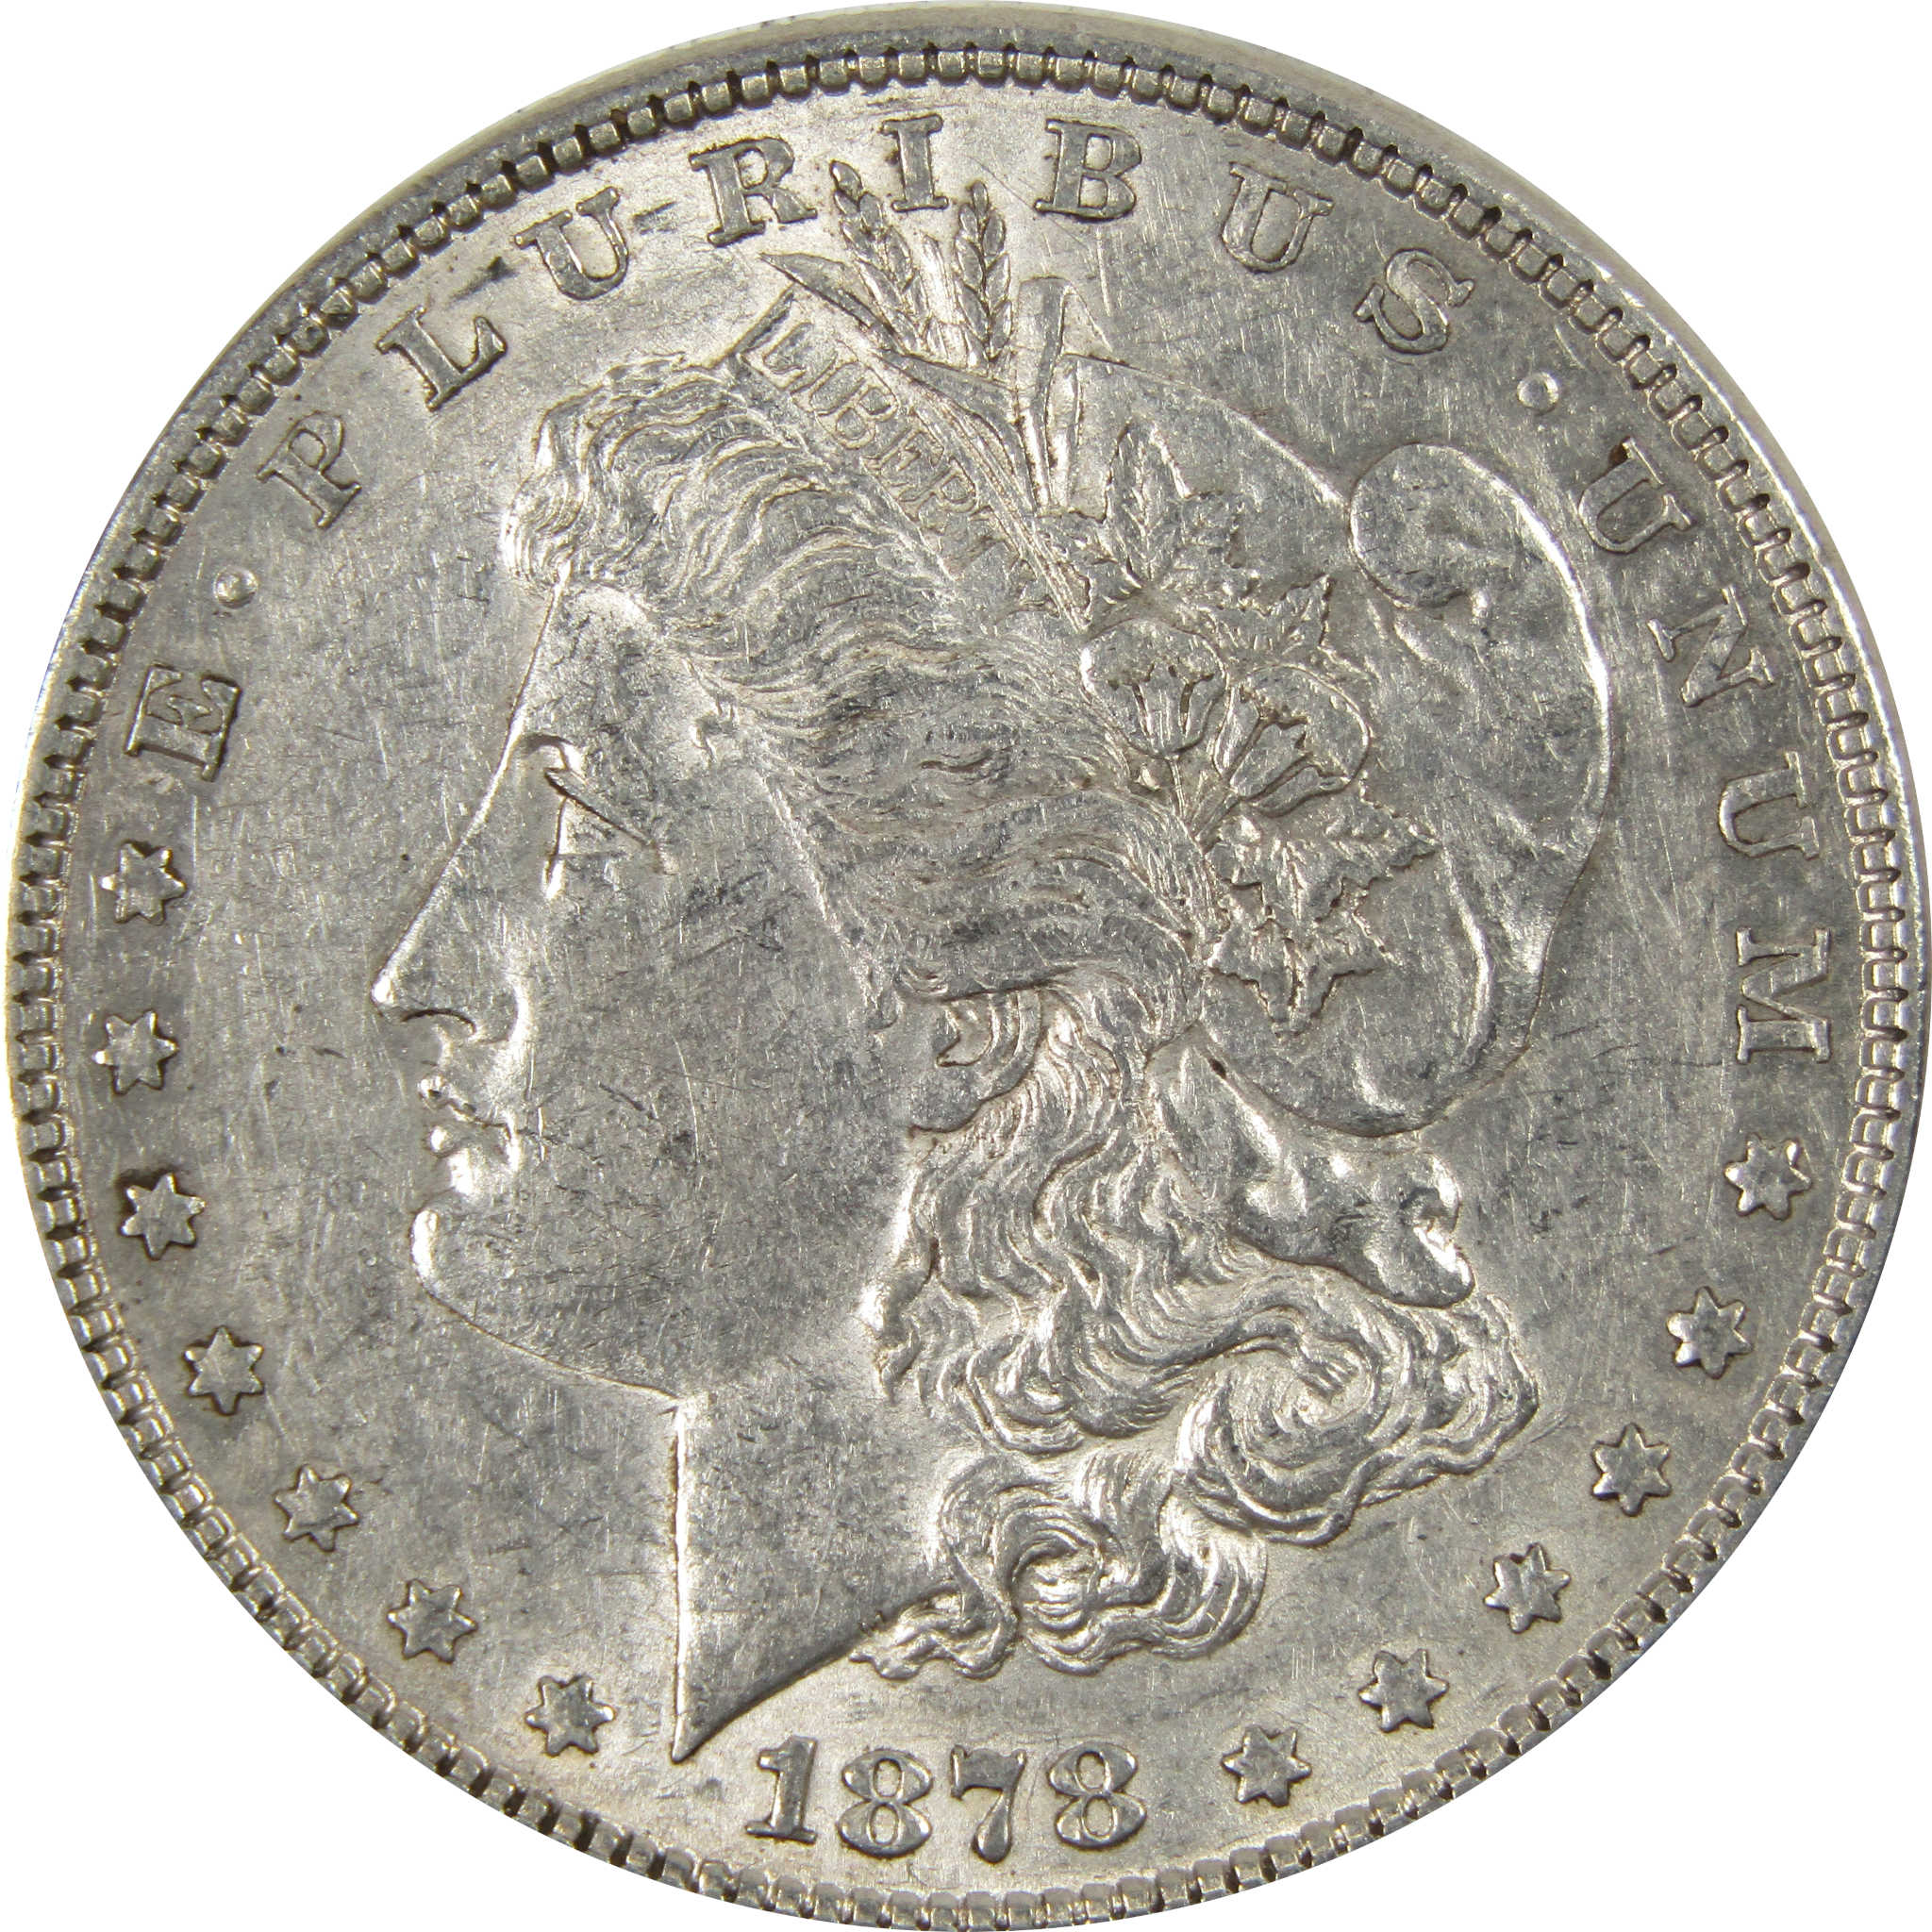 1878 7TF Rev 78 Morgan Dollar About Uncirculated 90% Silver SKU:I7898 - Morgan coin - Morgan silver dollar - Morgan silver dollar for sale - Profile Coins &amp; Collectibles